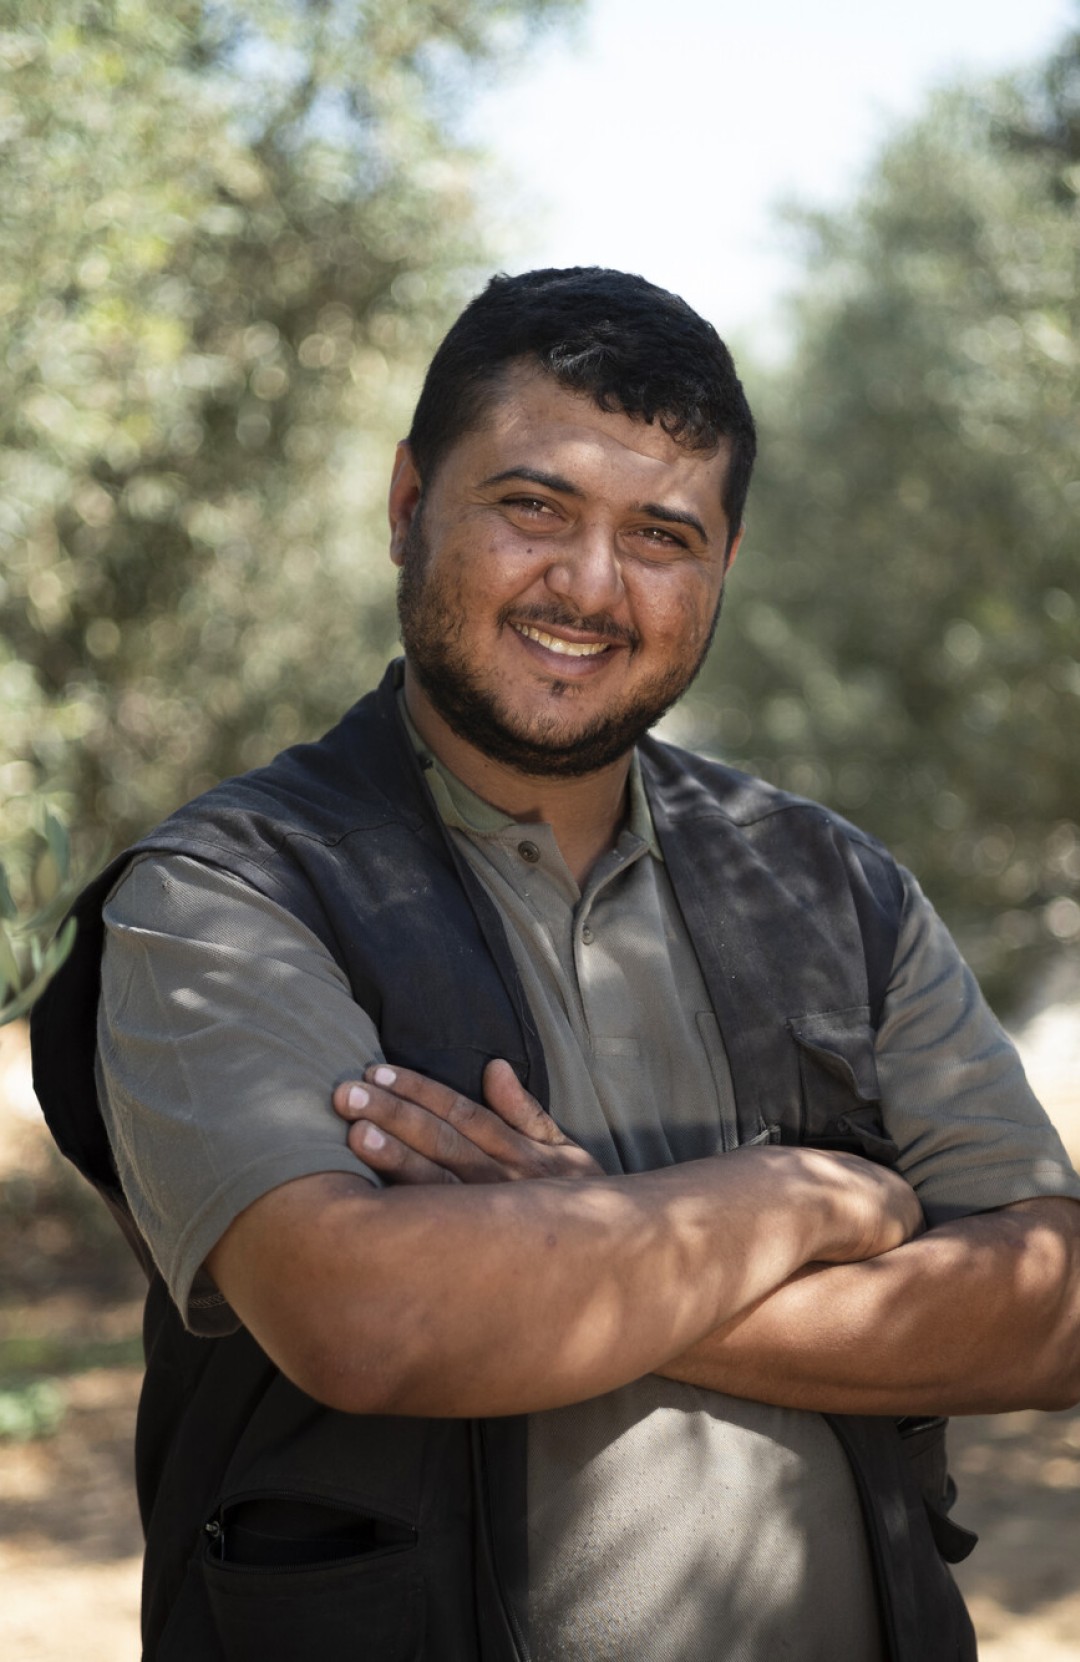 rs116109_portrait-of-ammar-is-an-olive-farmer-in-gaza-city.-his-land-has-been-bulldozed-three-times-by-the-israelis.jpg